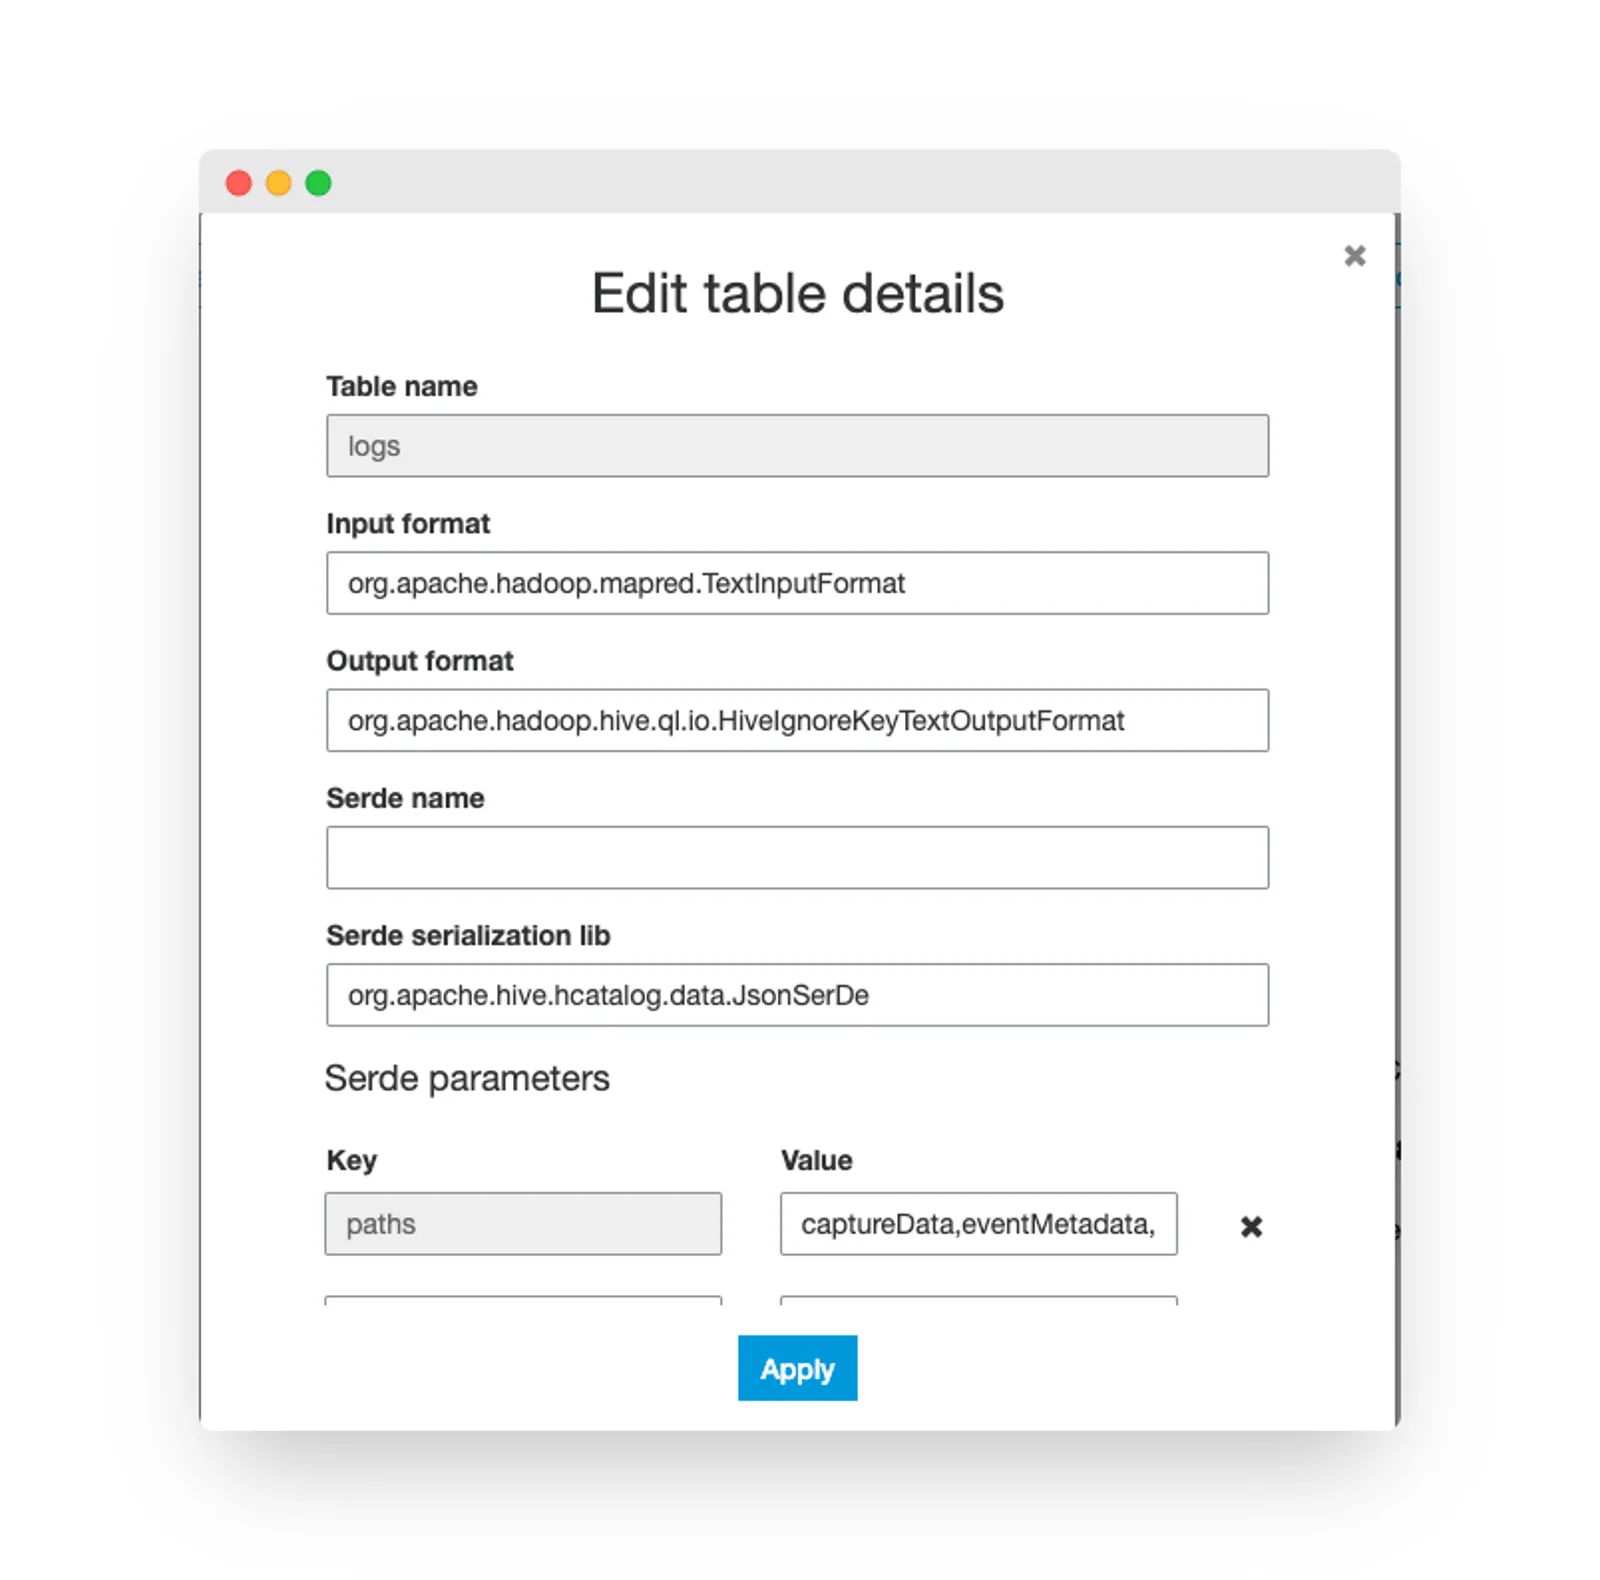 JSON serialization configured in the table details view